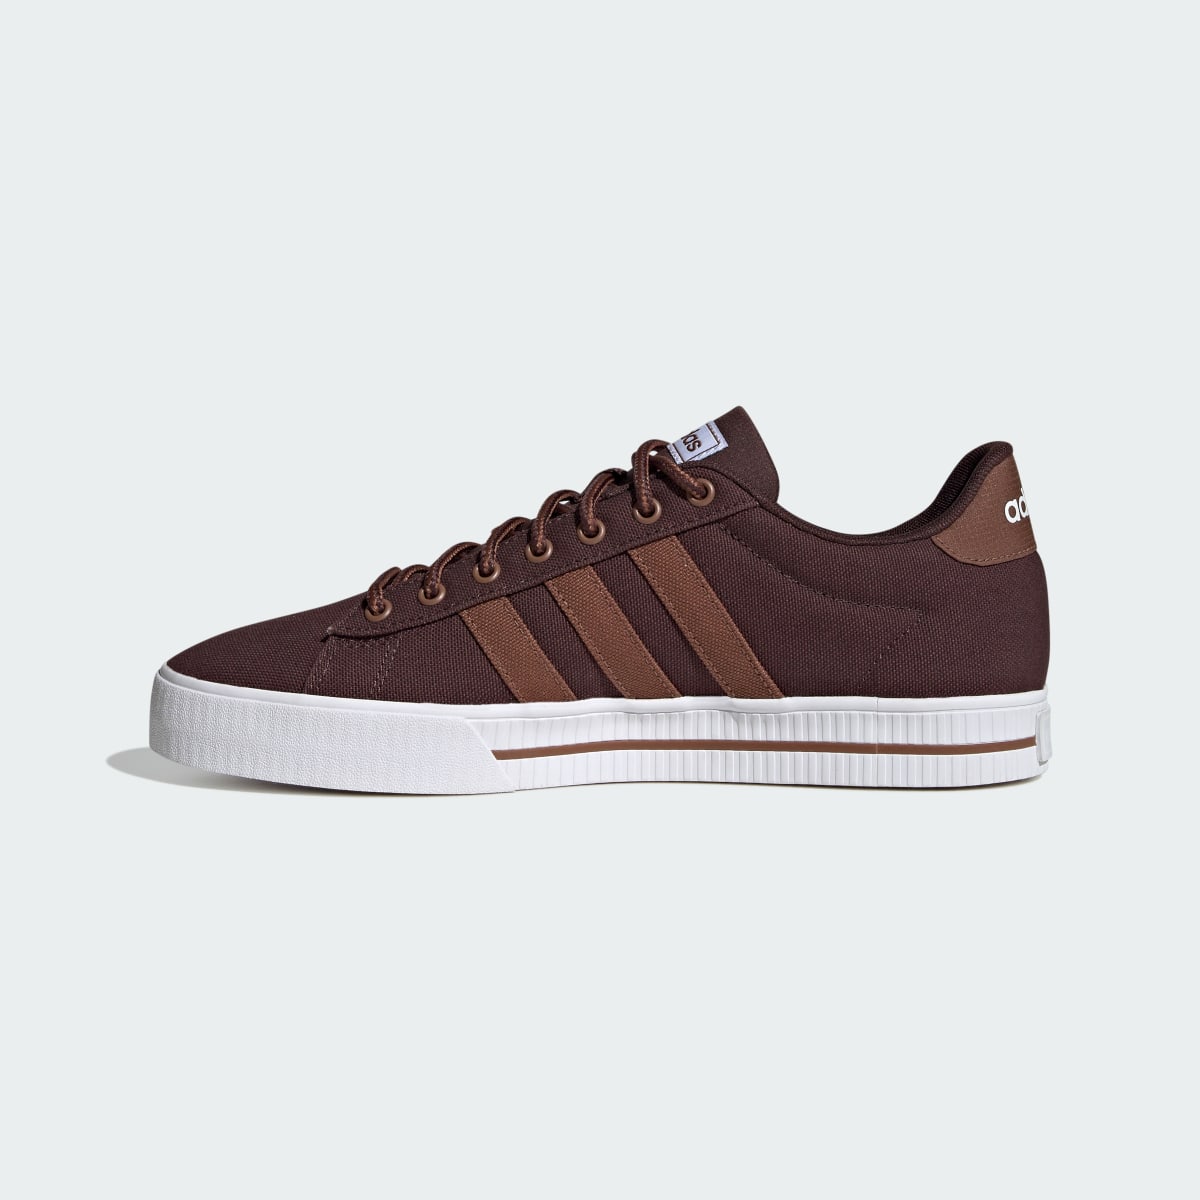 Adidas Daily 3.0 Shoes. 7